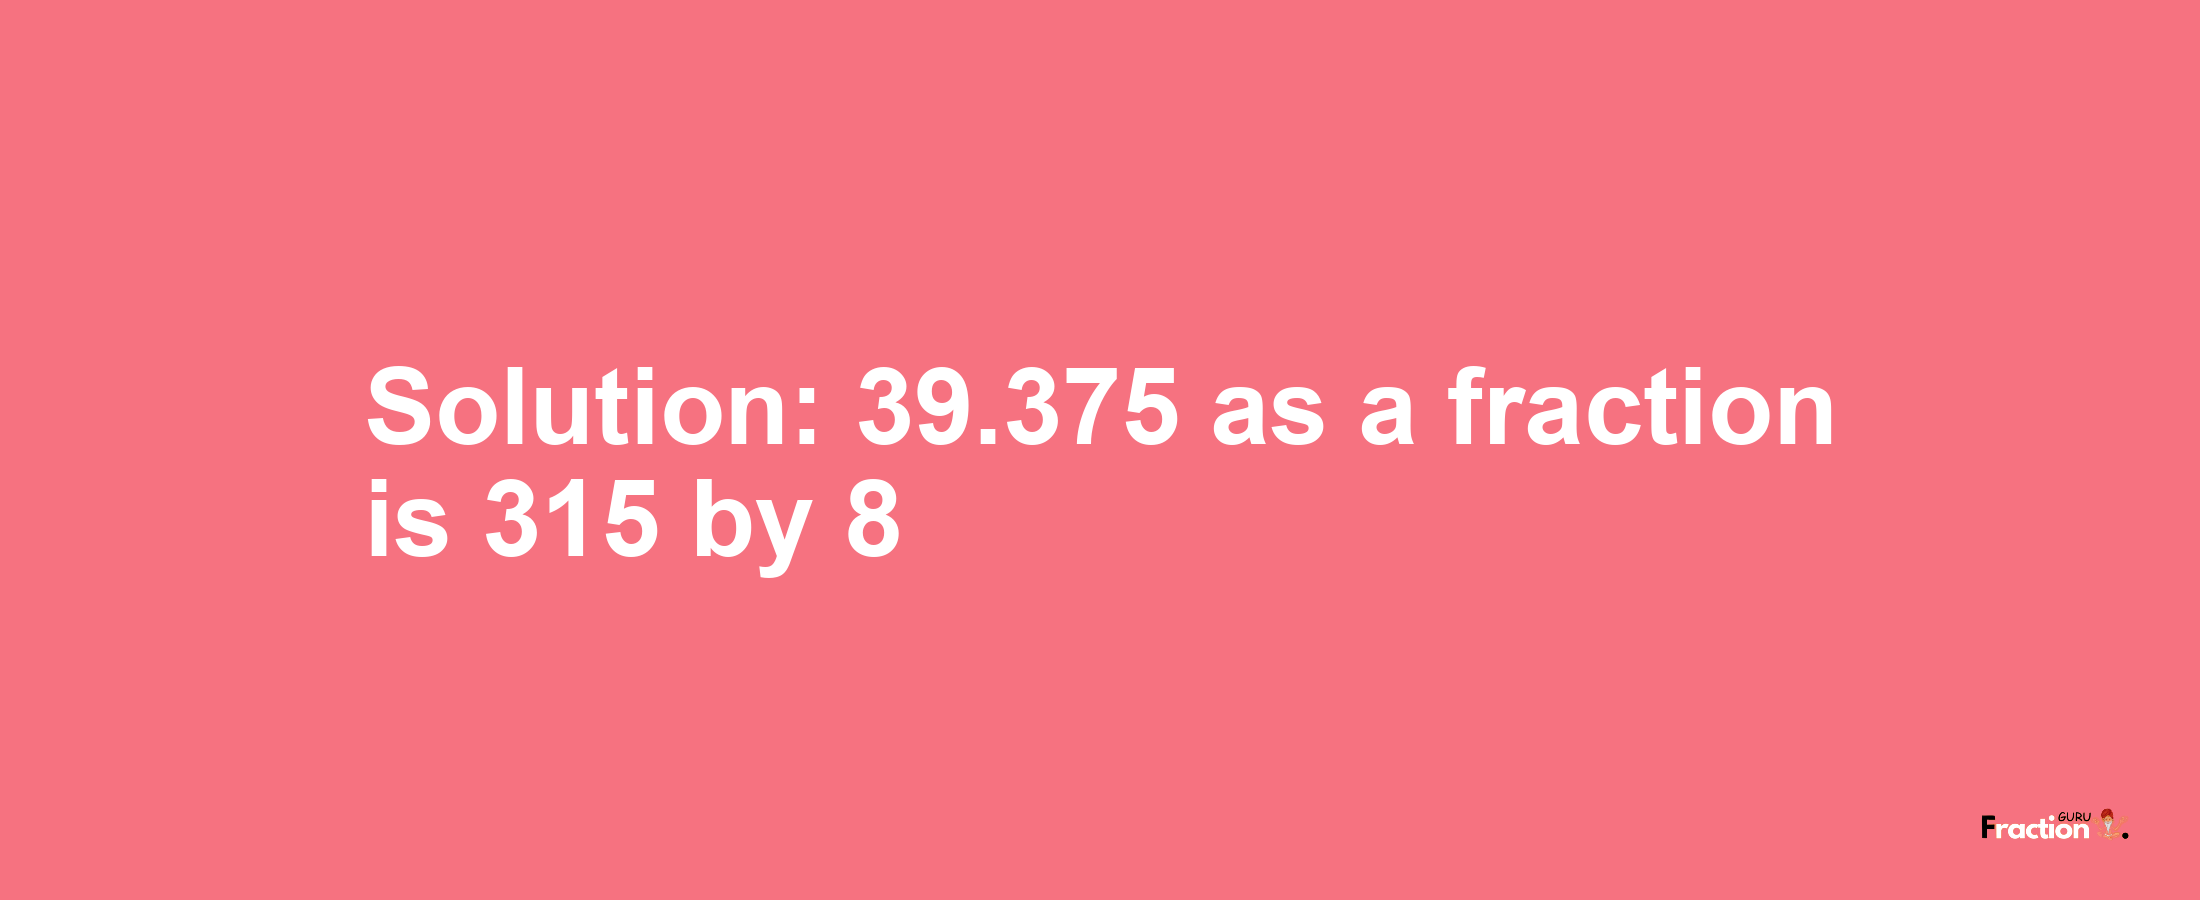 Solution:39.375 as a fraction is 315/8